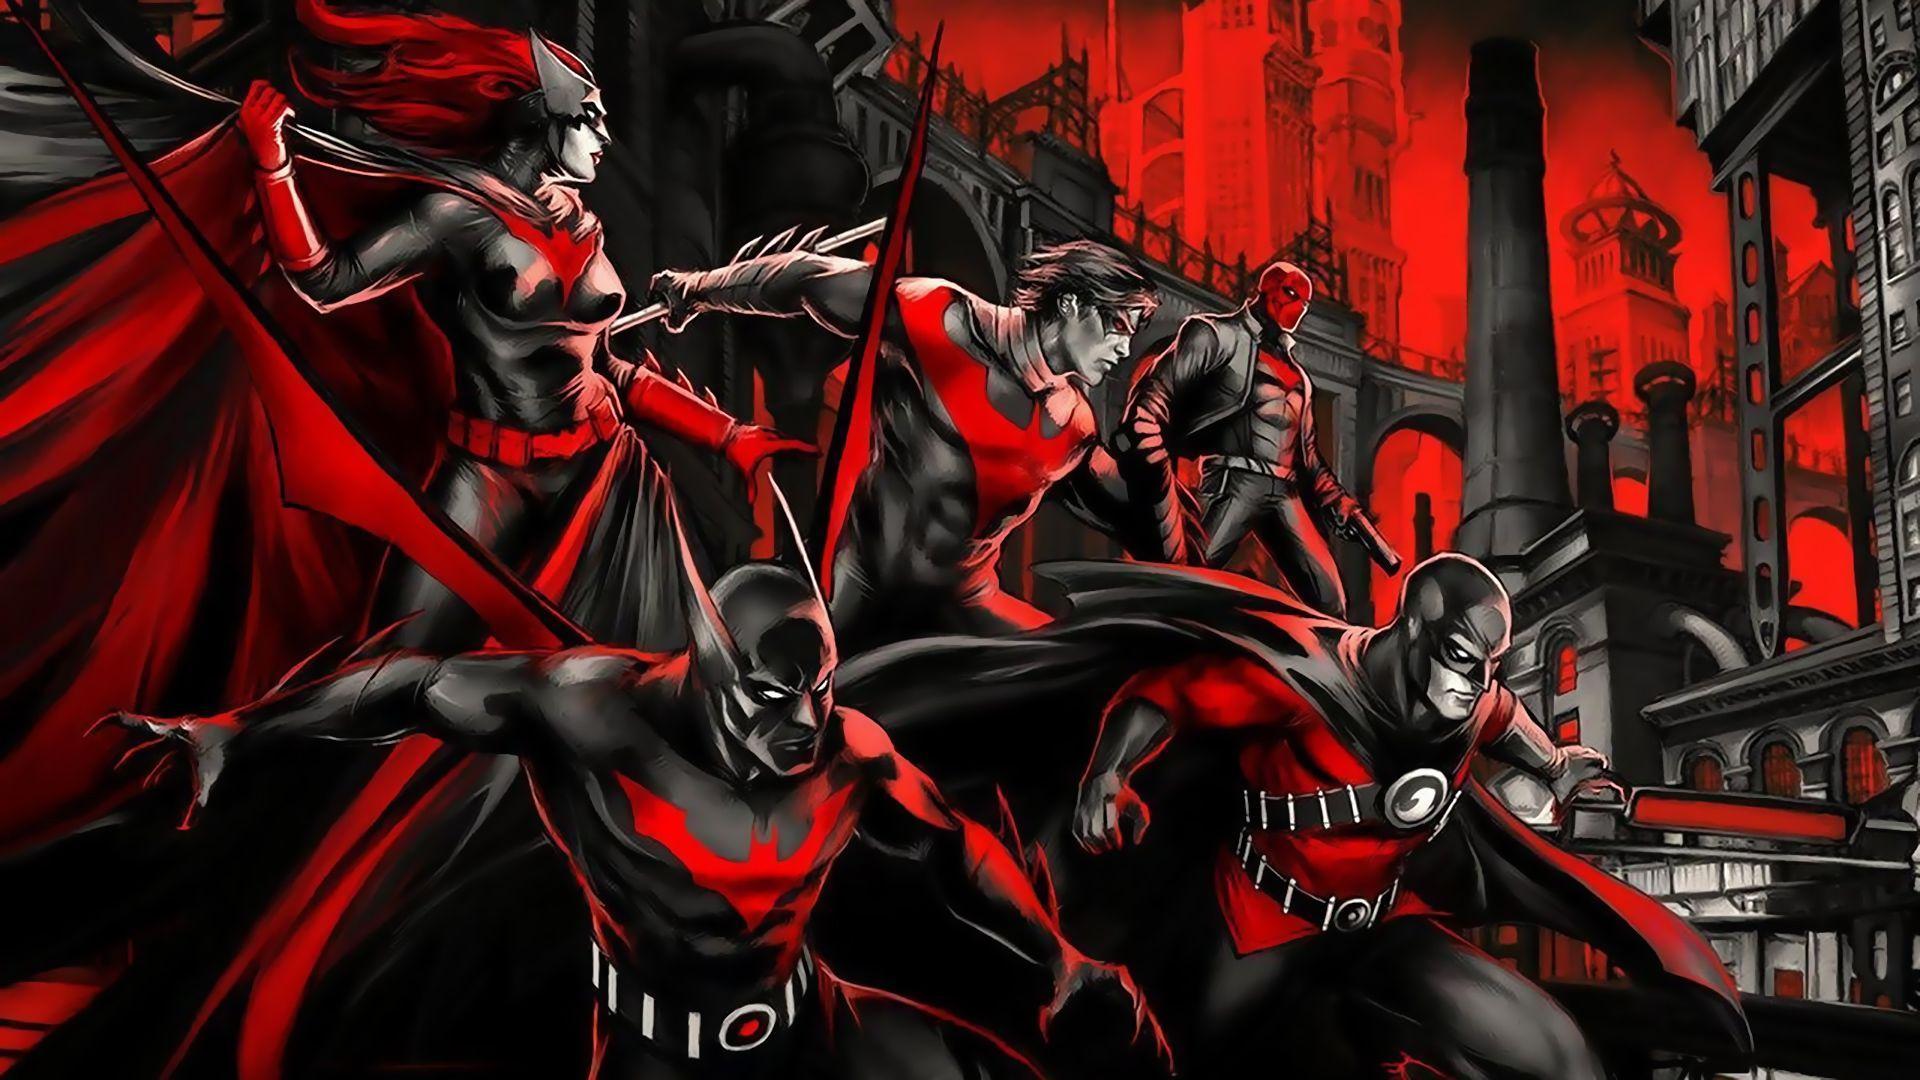 Download wallpaper red, red, Nightwing, Gotham, Batwoman, Red